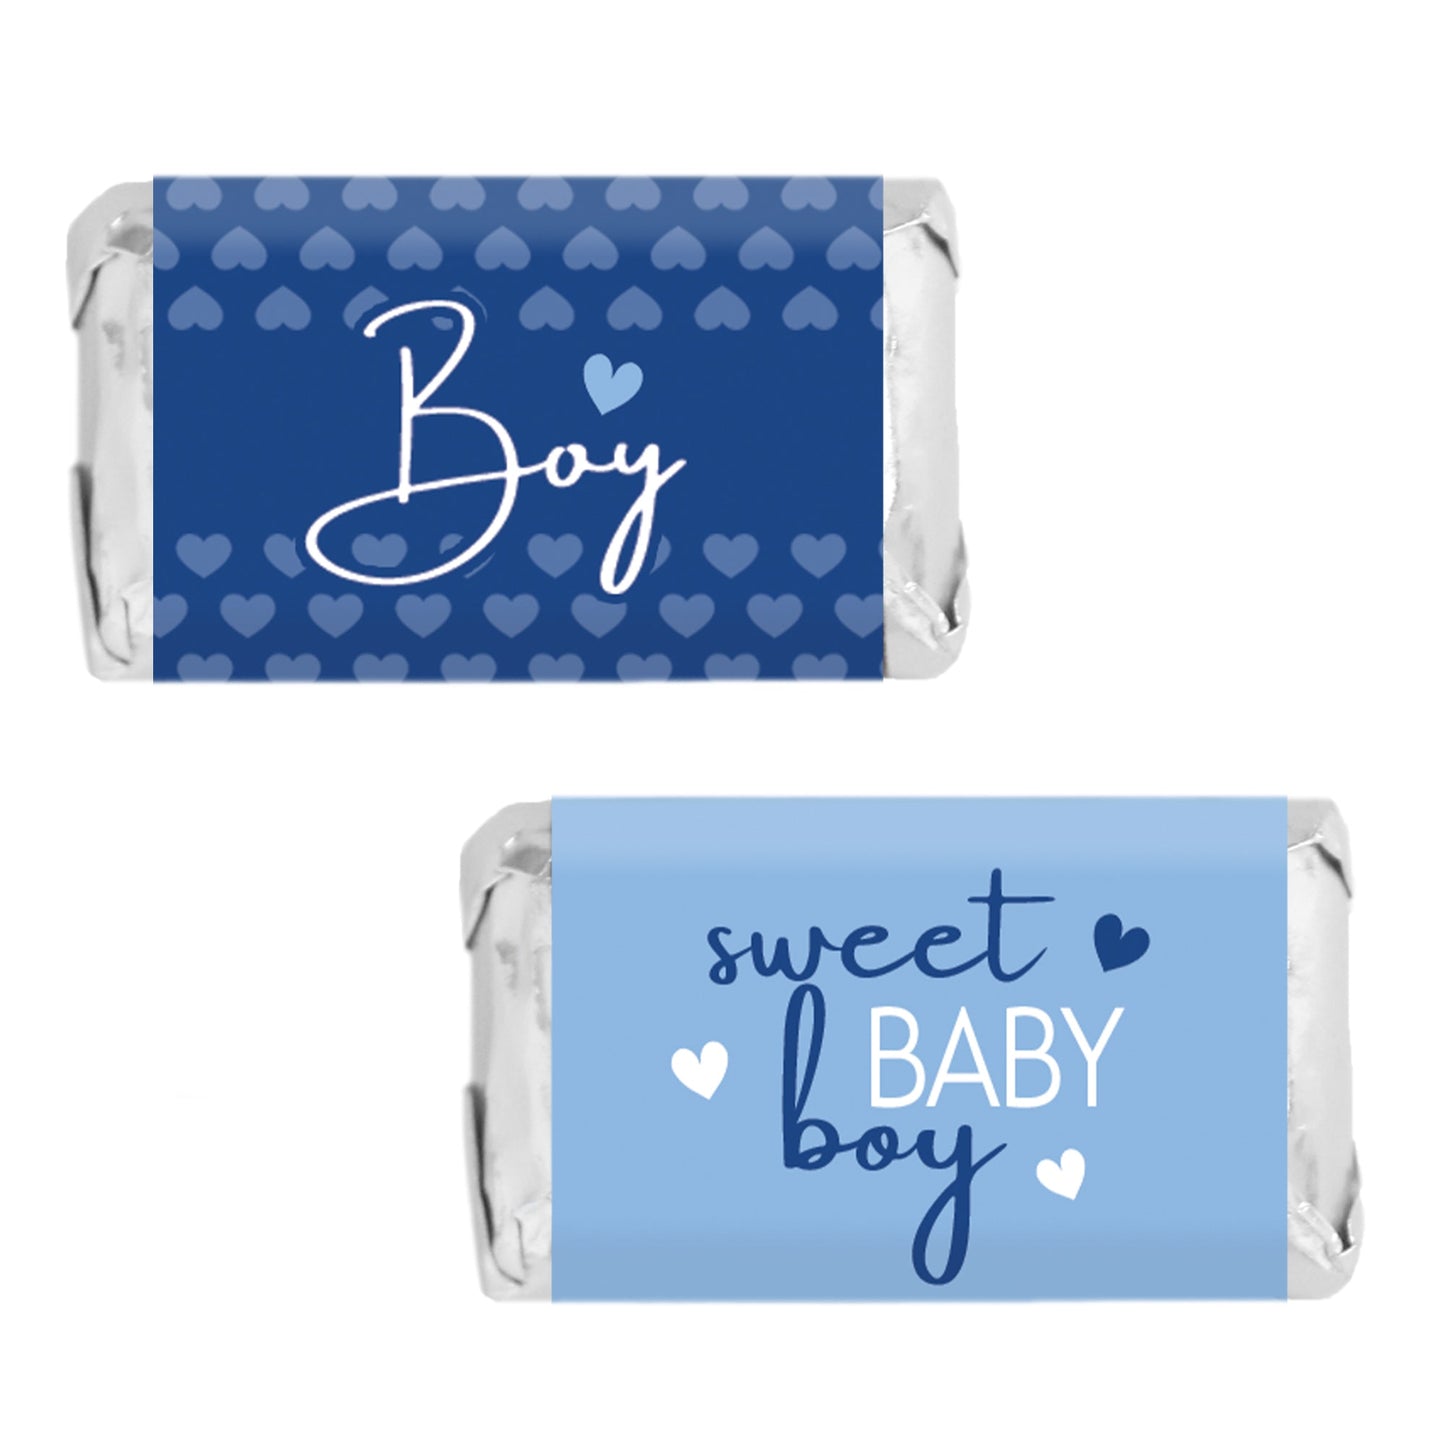 Sweet Baby Boy: Blue - Baby Shower Mini Candy Bar Labels -  45 Stickers